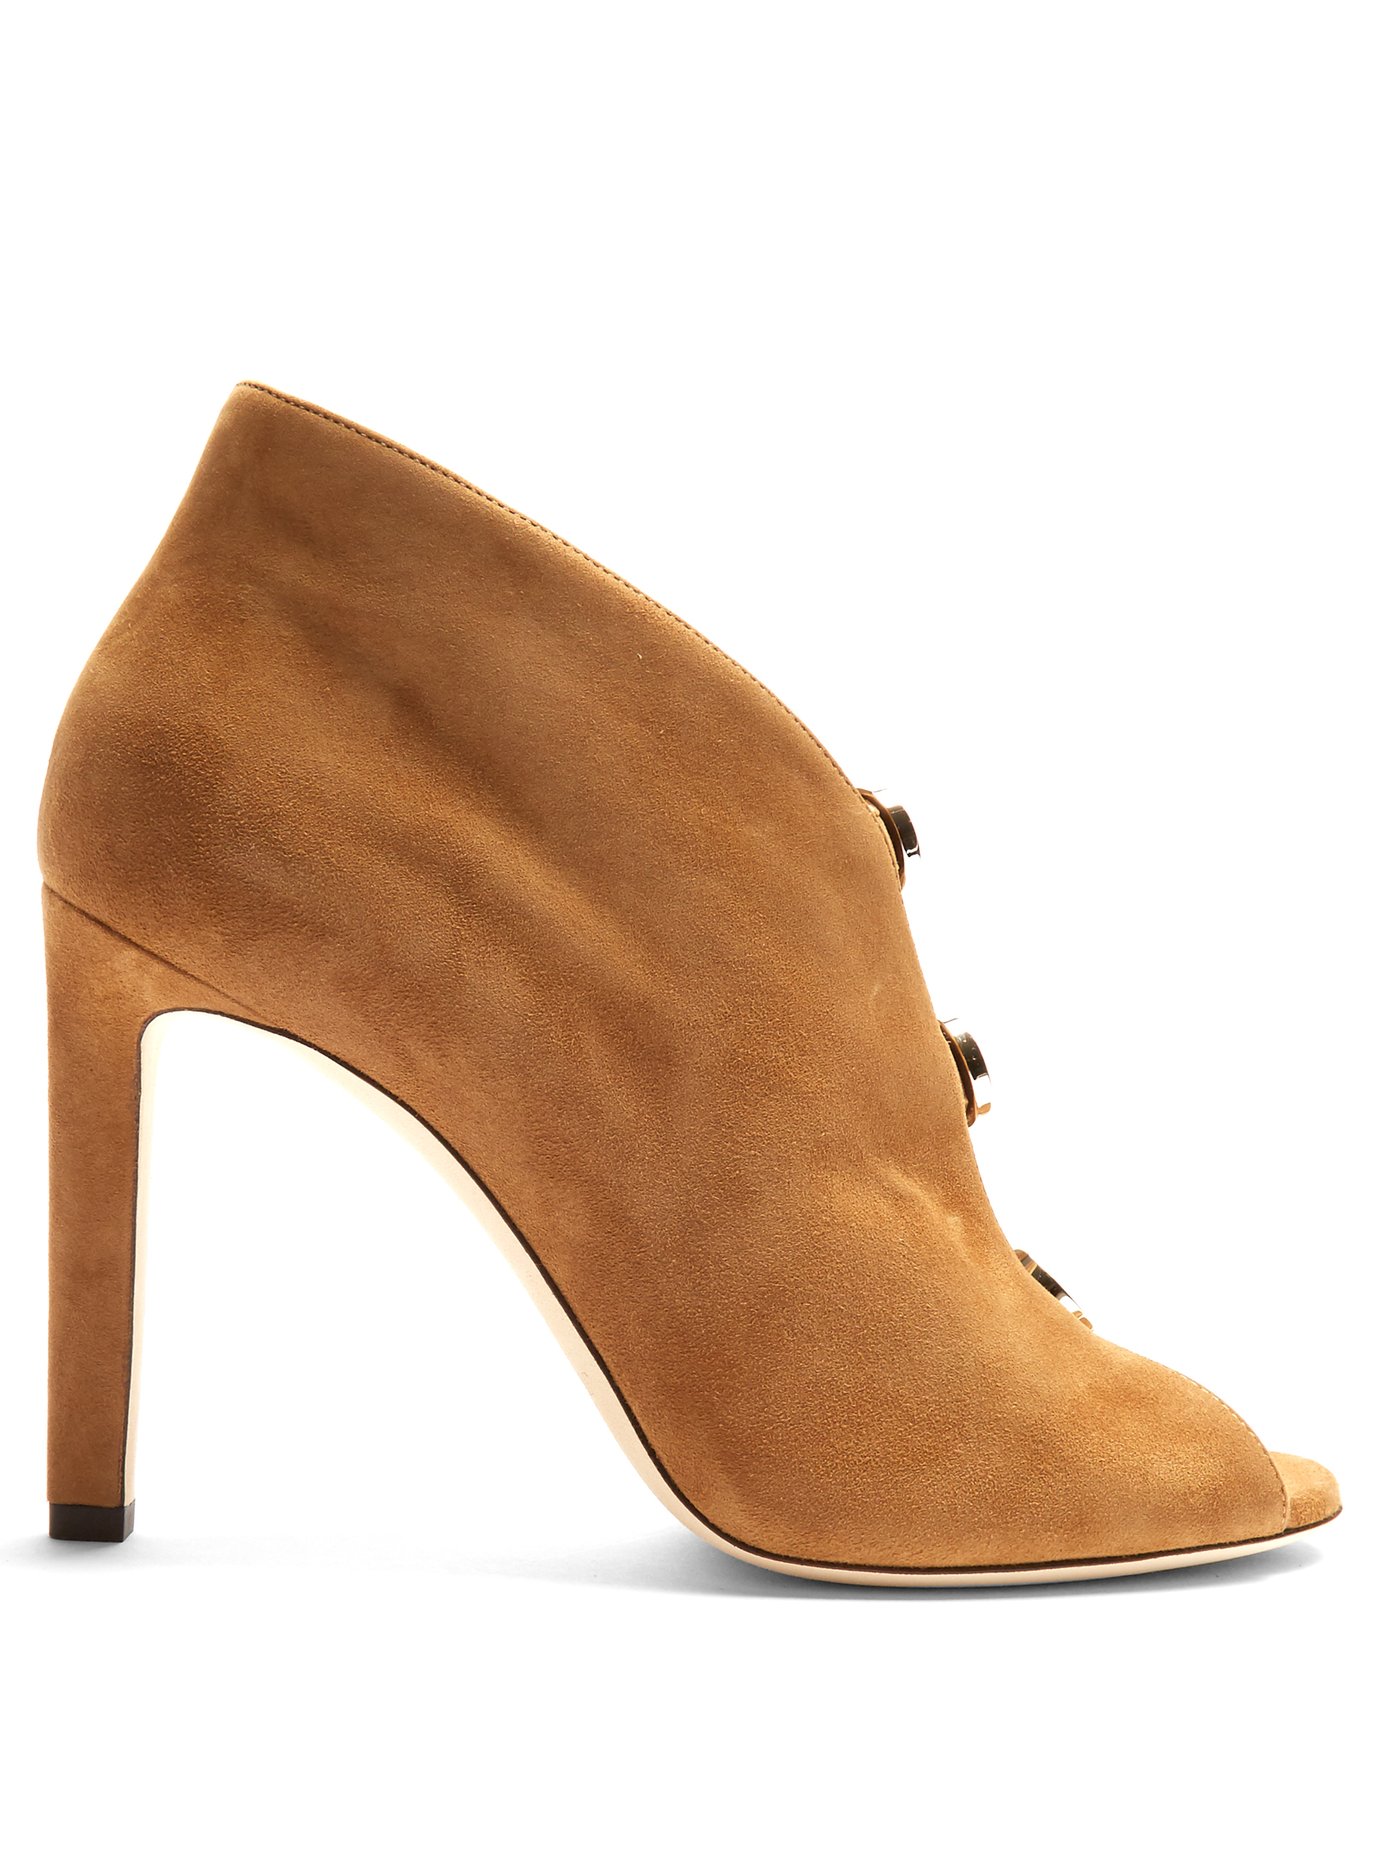 Lorna 100mm suede ankle boots | Jimmy 